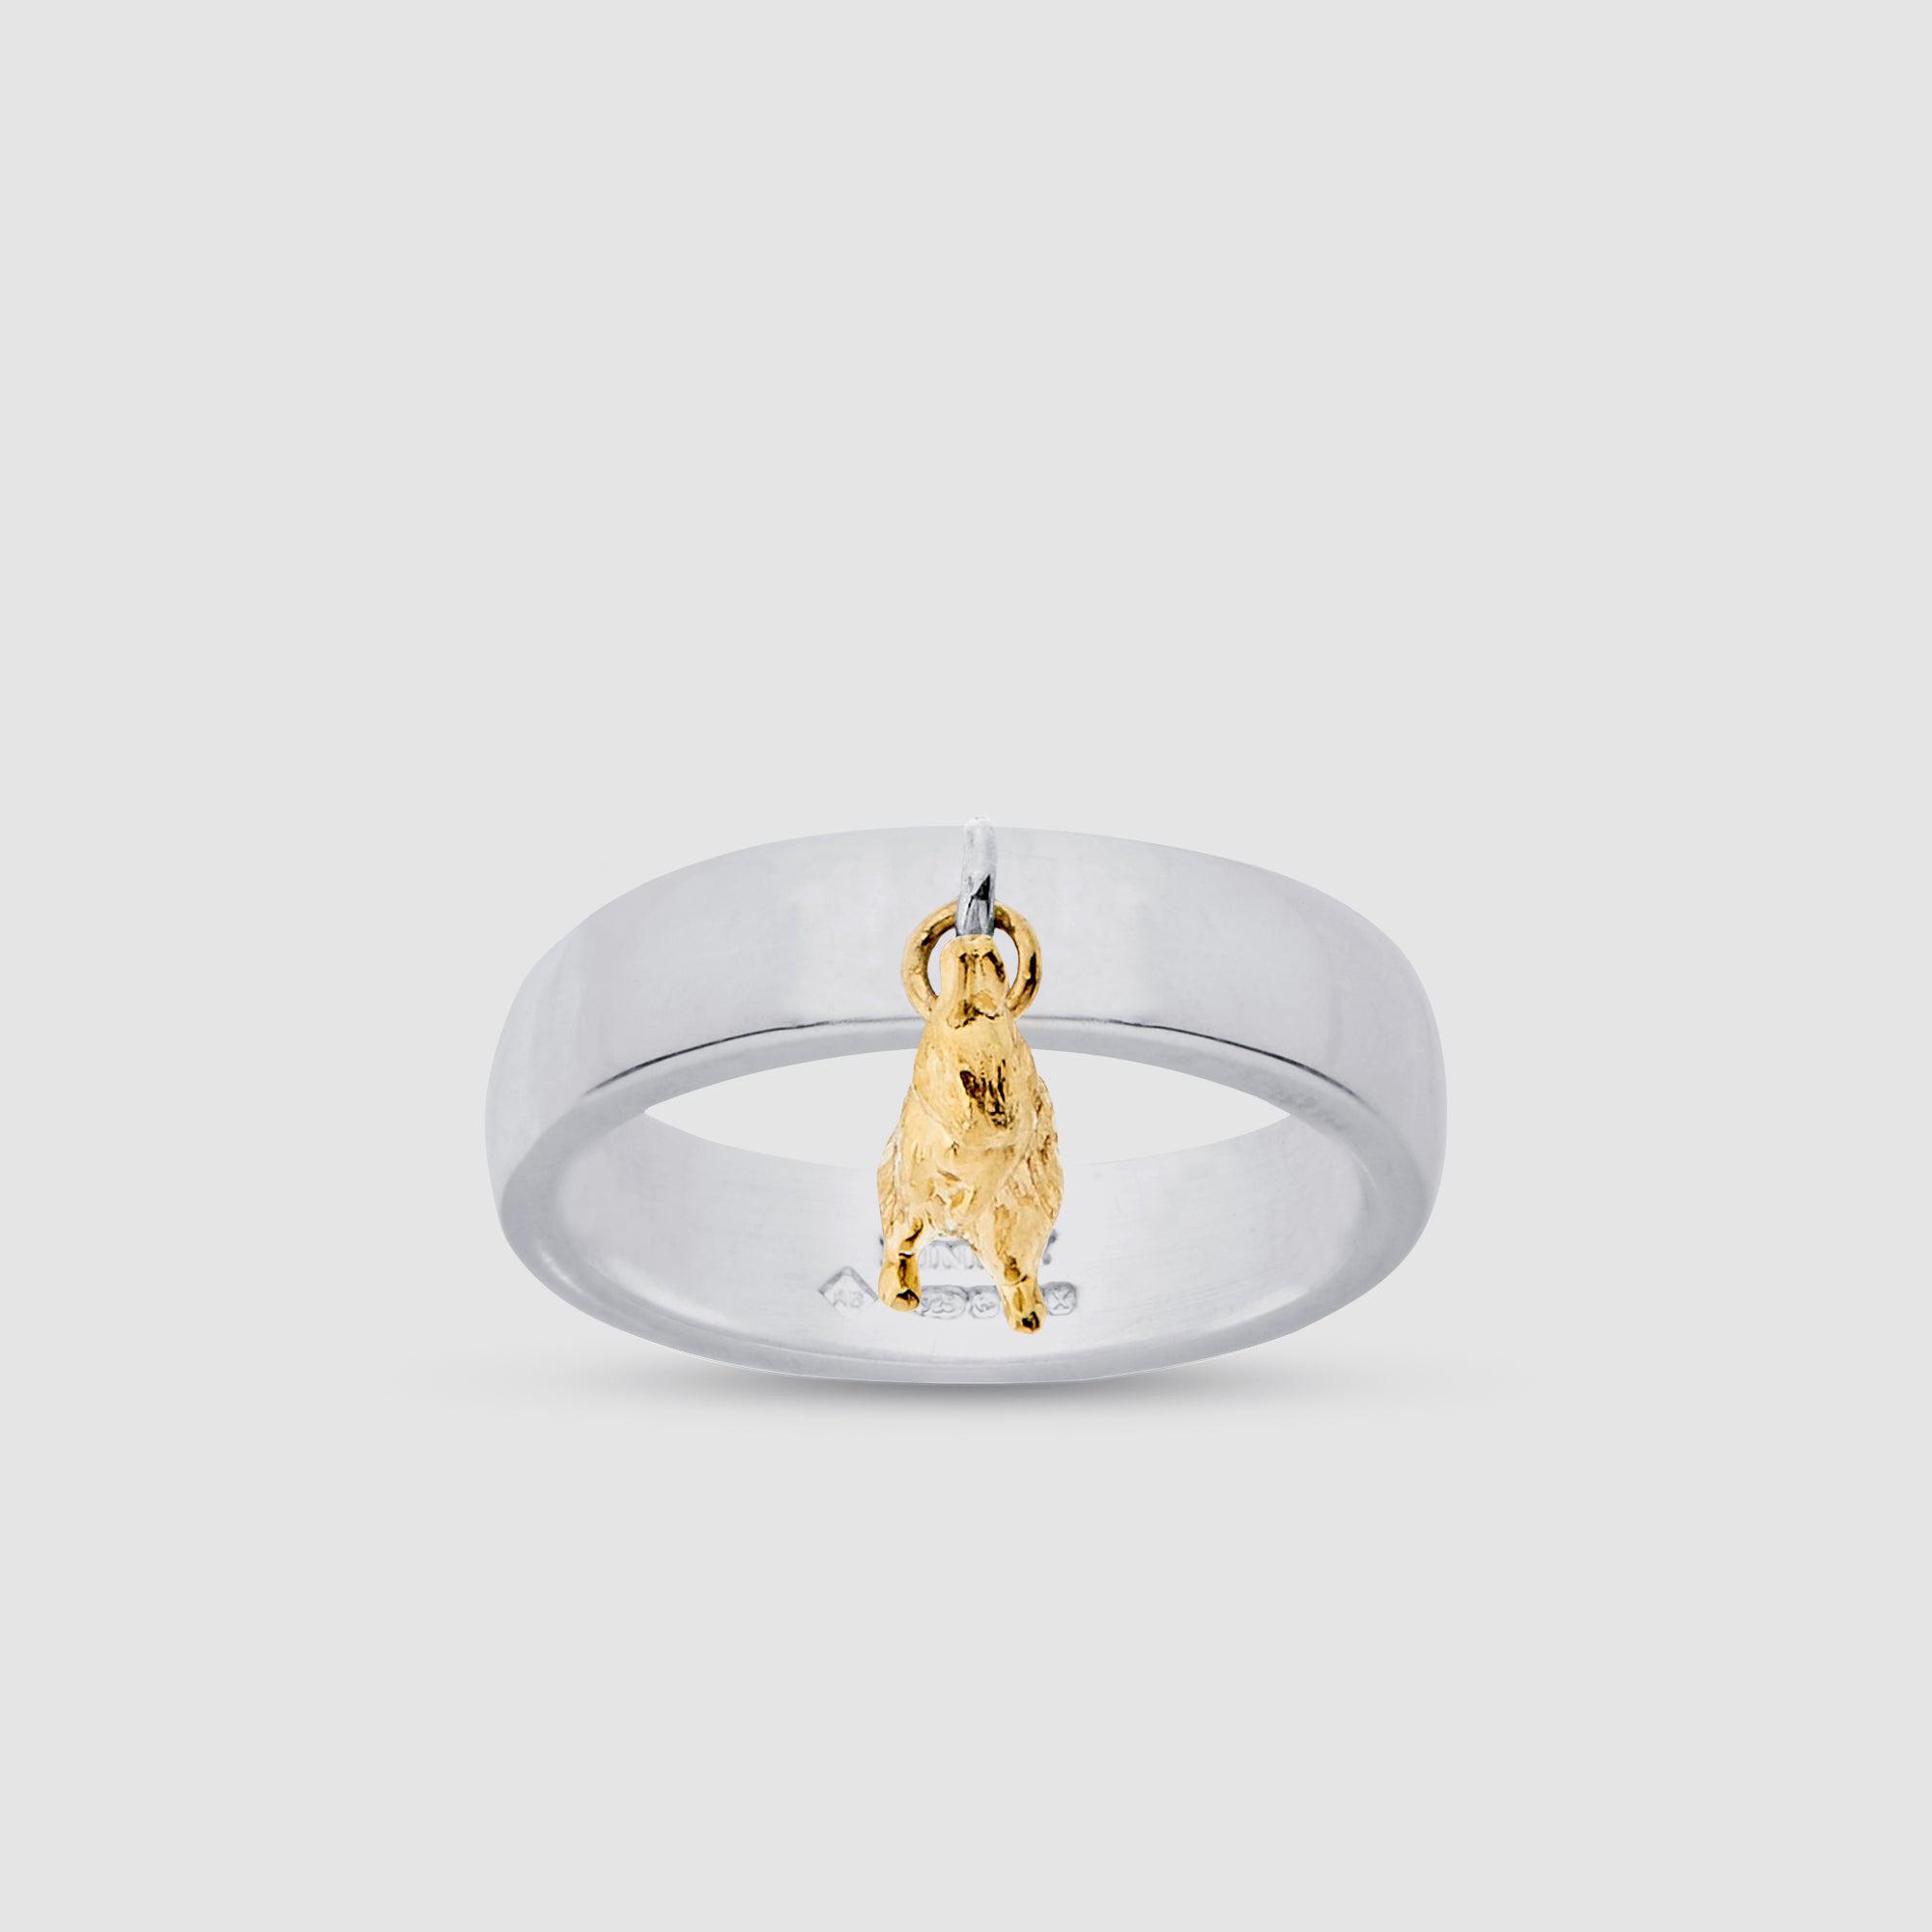 Bunney Silver Ring with Yellow Gold Rabbit Charm by ANDREW BUNNEY